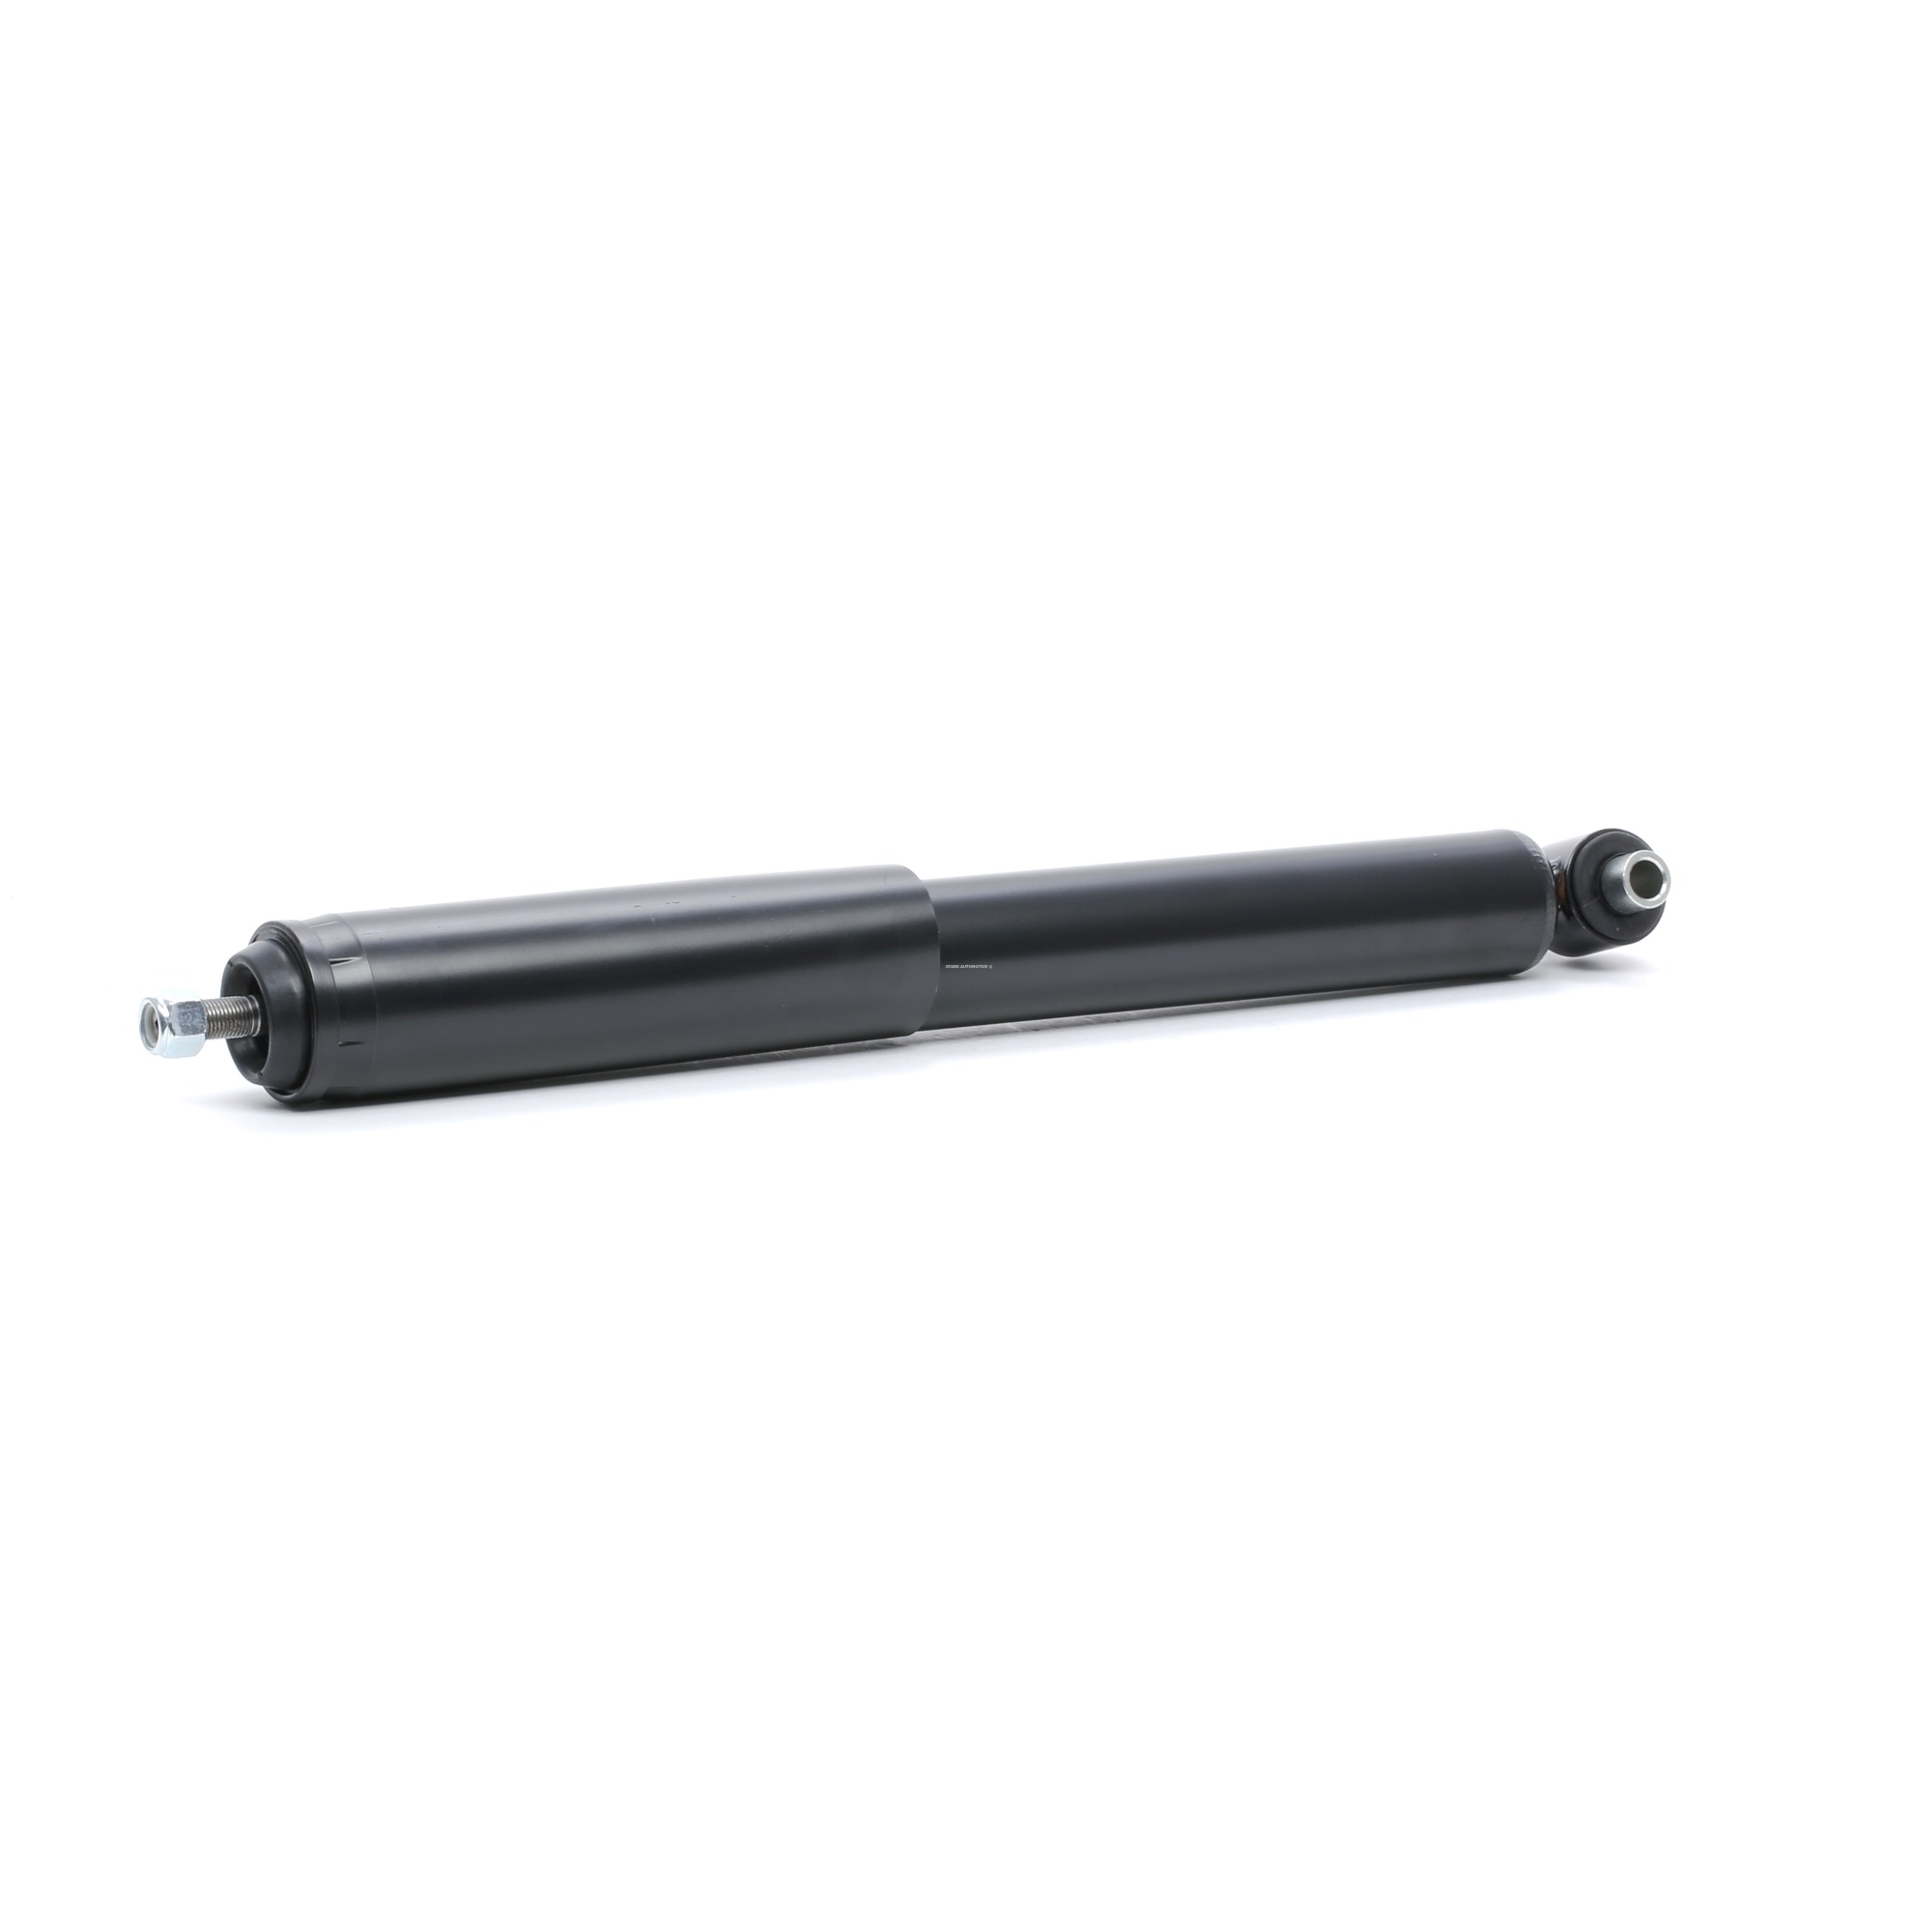 STARK SKSA-0133128 Shock absorber Rear Axle, Gas Pressure, Twin-Tube, Absorber does not carry a spring, Damper without Rebound Spring, Telescopic Shock Absorber, Bottom eye, Top pin